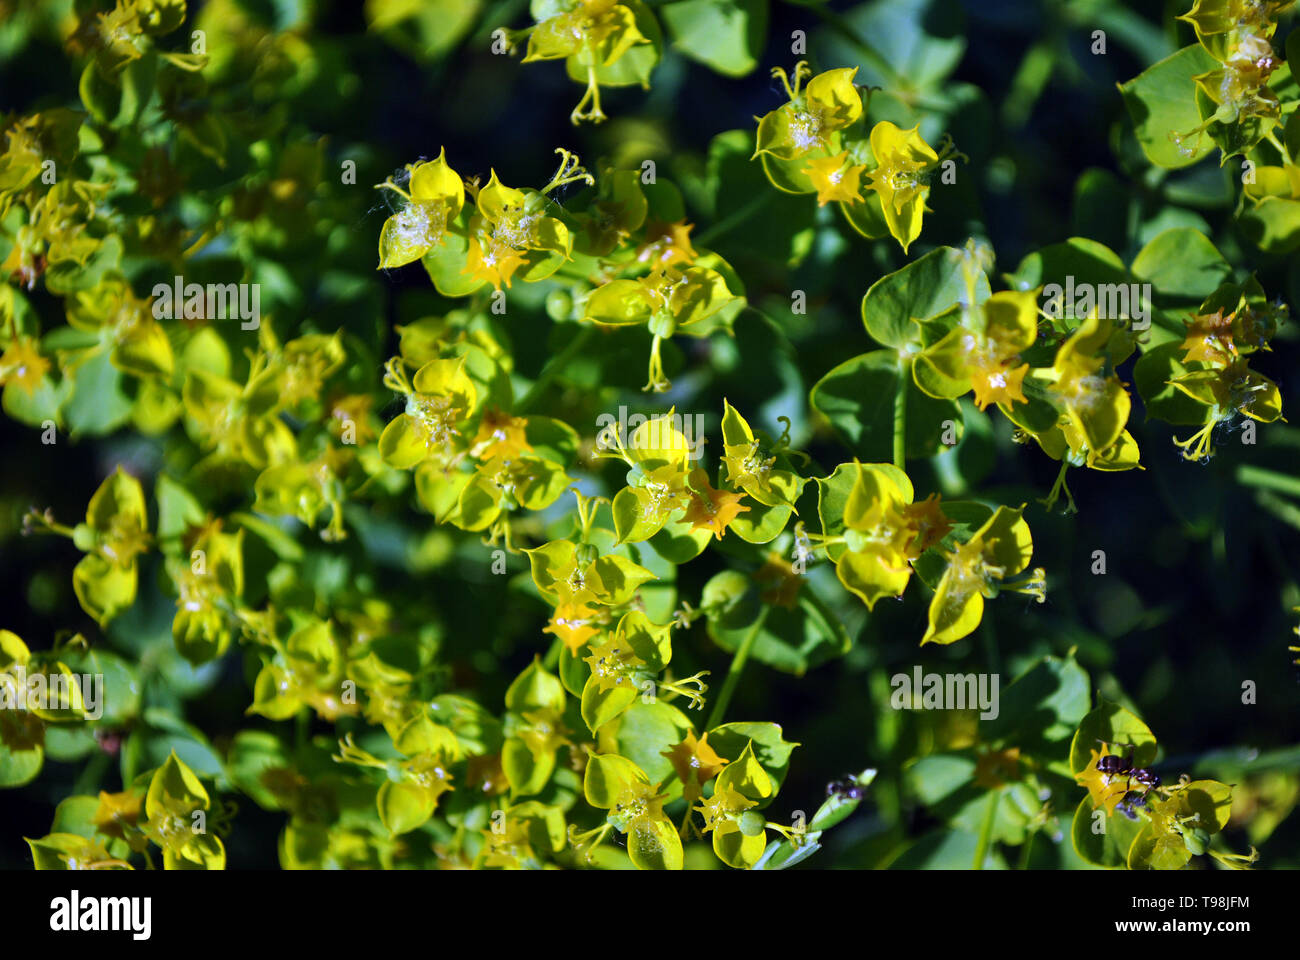 Euphorbia esula (green or leafy spurge) blooming flowers close up macro detail, organic texture background of blossom Stock Photo